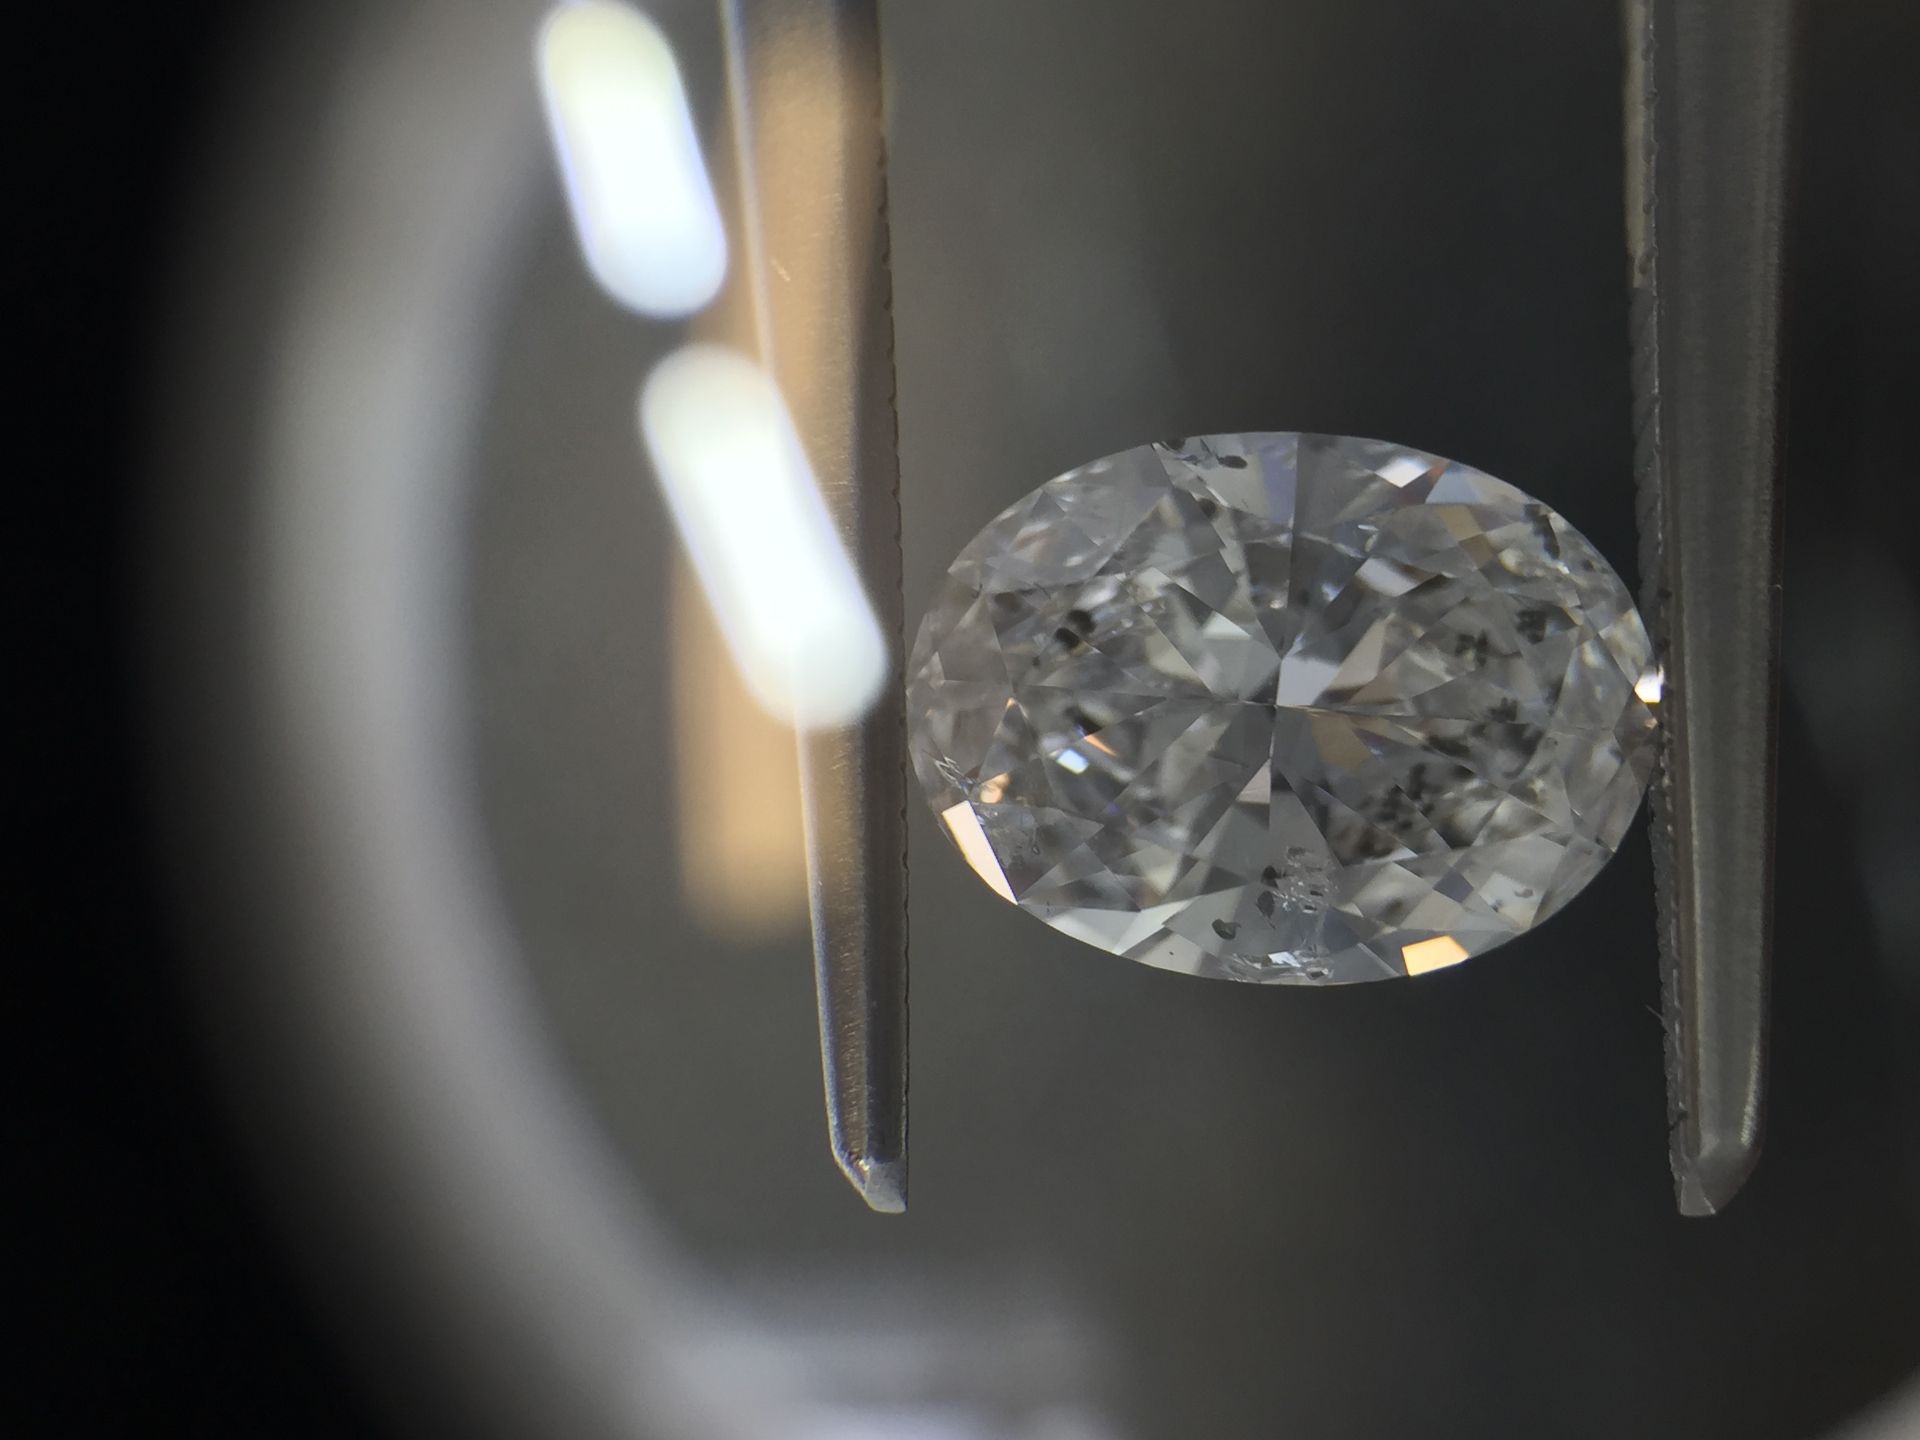 1.01ct oval cut diamond. D colour, SI2 clarity. No certificate. Valued at £7775